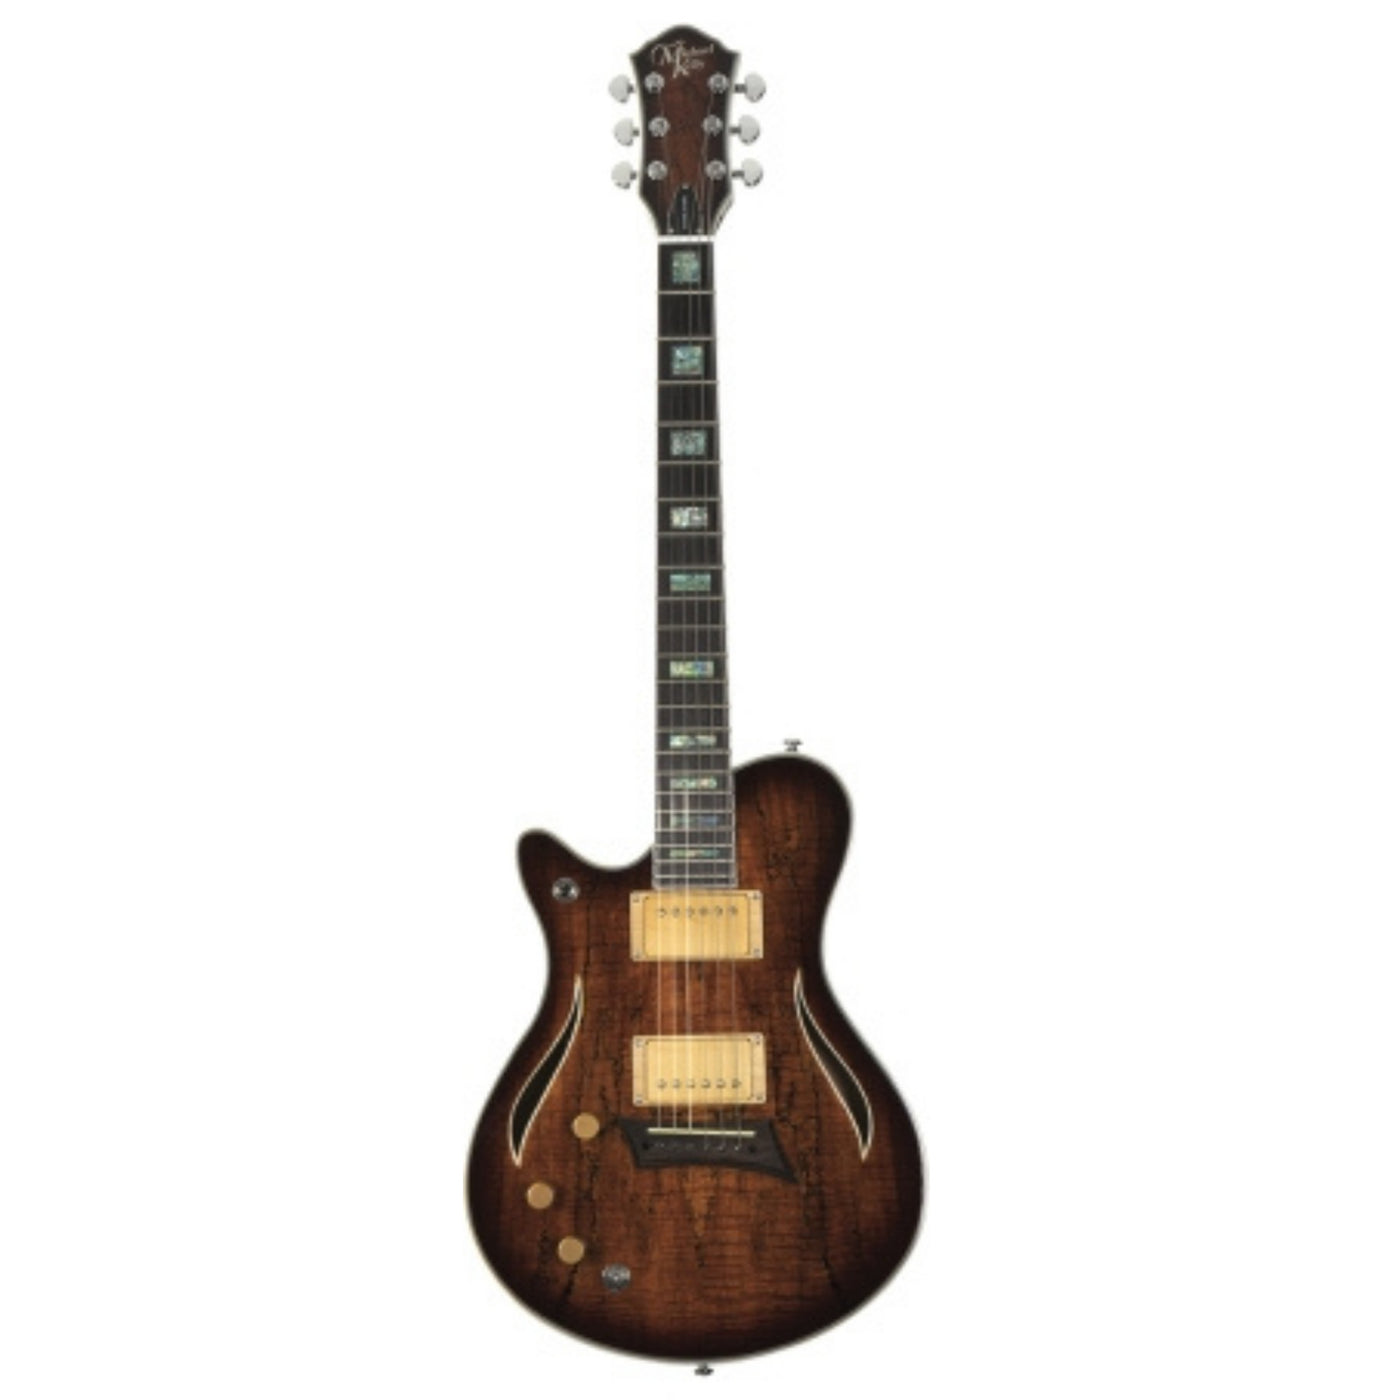 Michael Kelly Guitar Co. Hybrid Special Left Handed Electric Guitar, Spalted Maple Burst